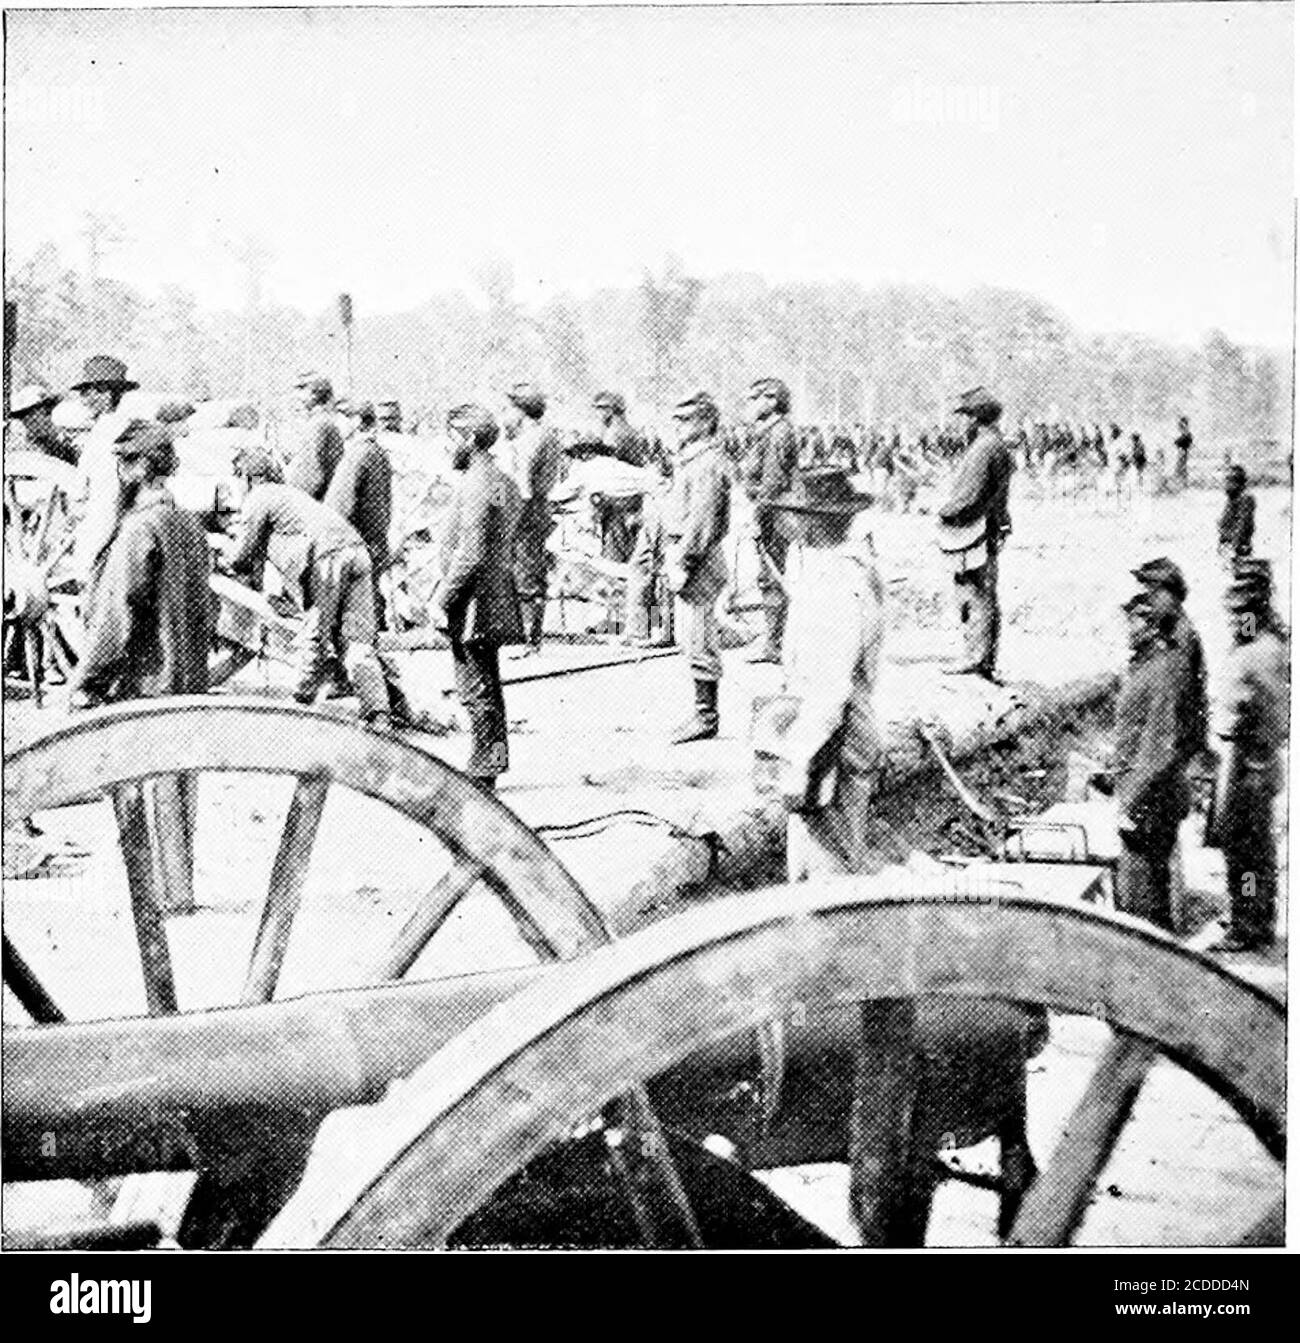 . History of the First Connecticut Artillery [electronic resource]: and of the siege trains of the armies operating against Richmond, 1862-1865 . Before Frederick burg in 18(52. Fort Sumner on the Chickahominy. This battery was manned by Co. B, and consisted of thirty-pound This photograph was taken in June, 1802, and shows the light gunRodman guns. This photograph was taken after the battle, and detachments at their posts awaiting a threatened attack. shows the guns limbered up and in the traveling trunnions. Stock Photo